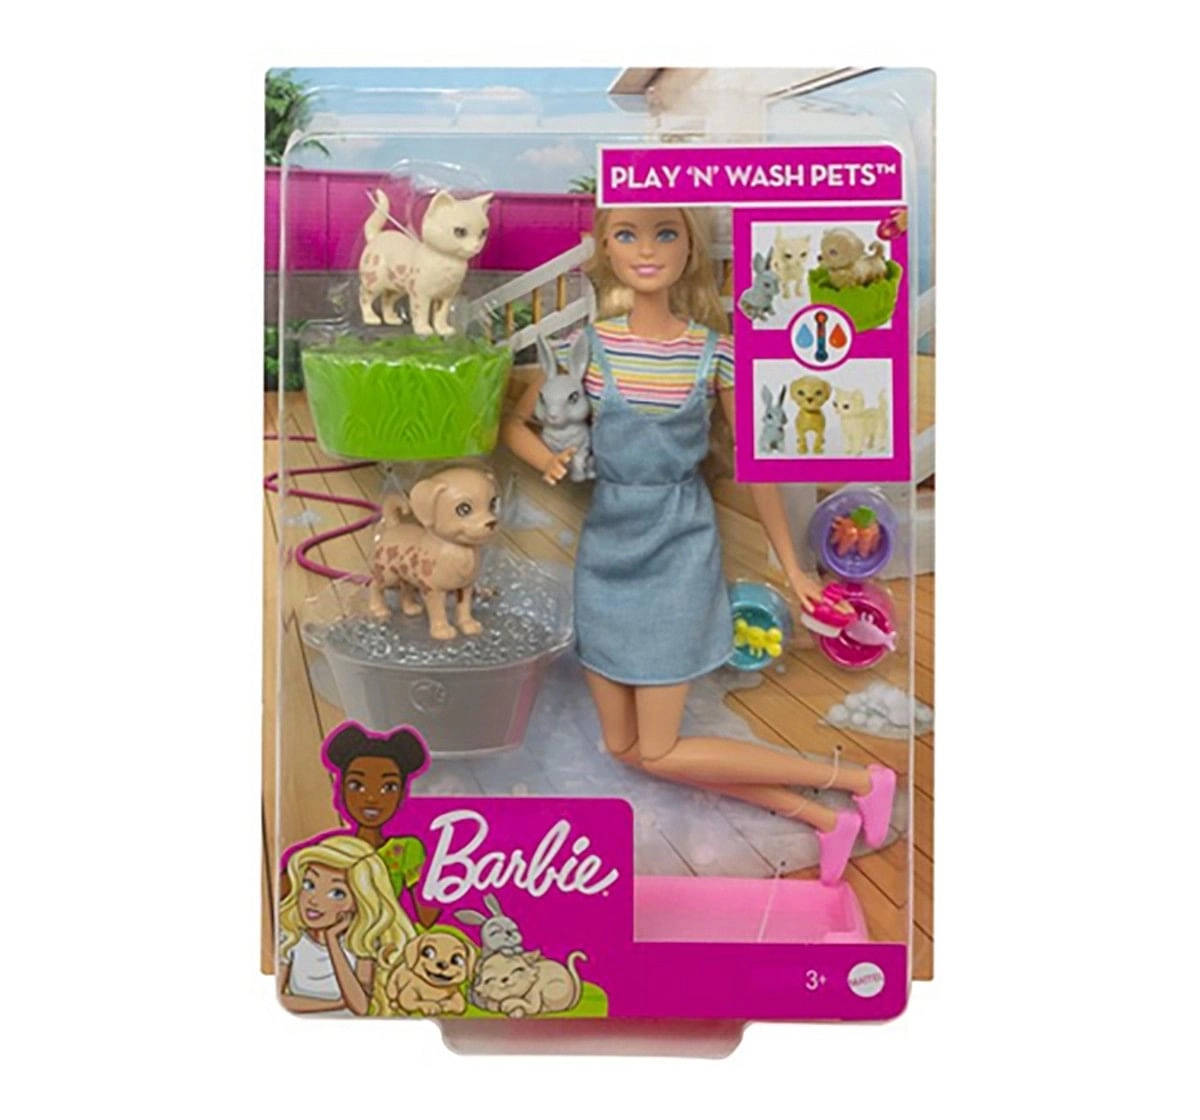 Barbie  Play N Wash Pets Dolls & Accessories for Girls age 3Y+, Assorted